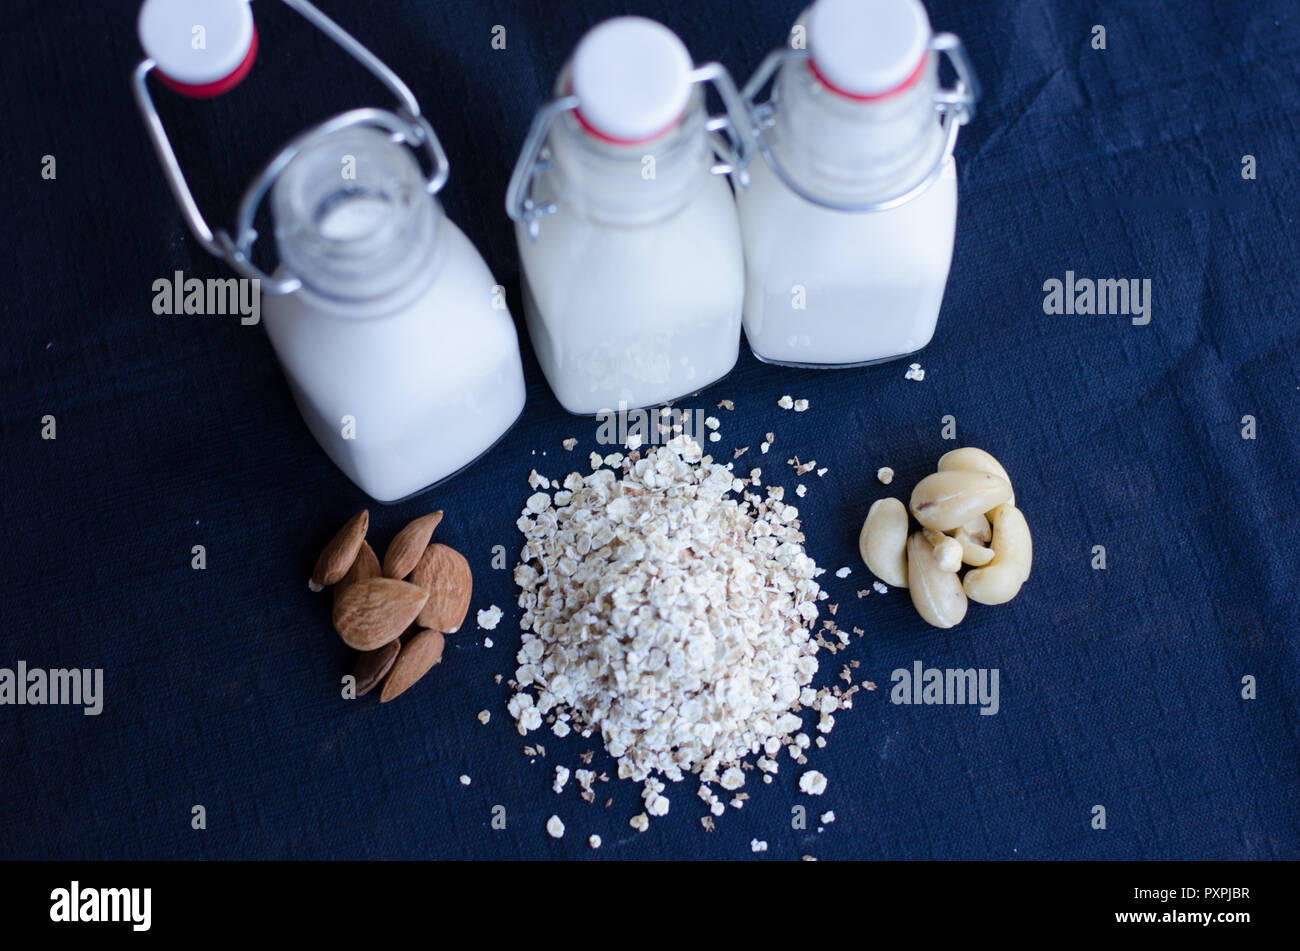 A group of non-dairy alternatives on a dark background. Stock Photo